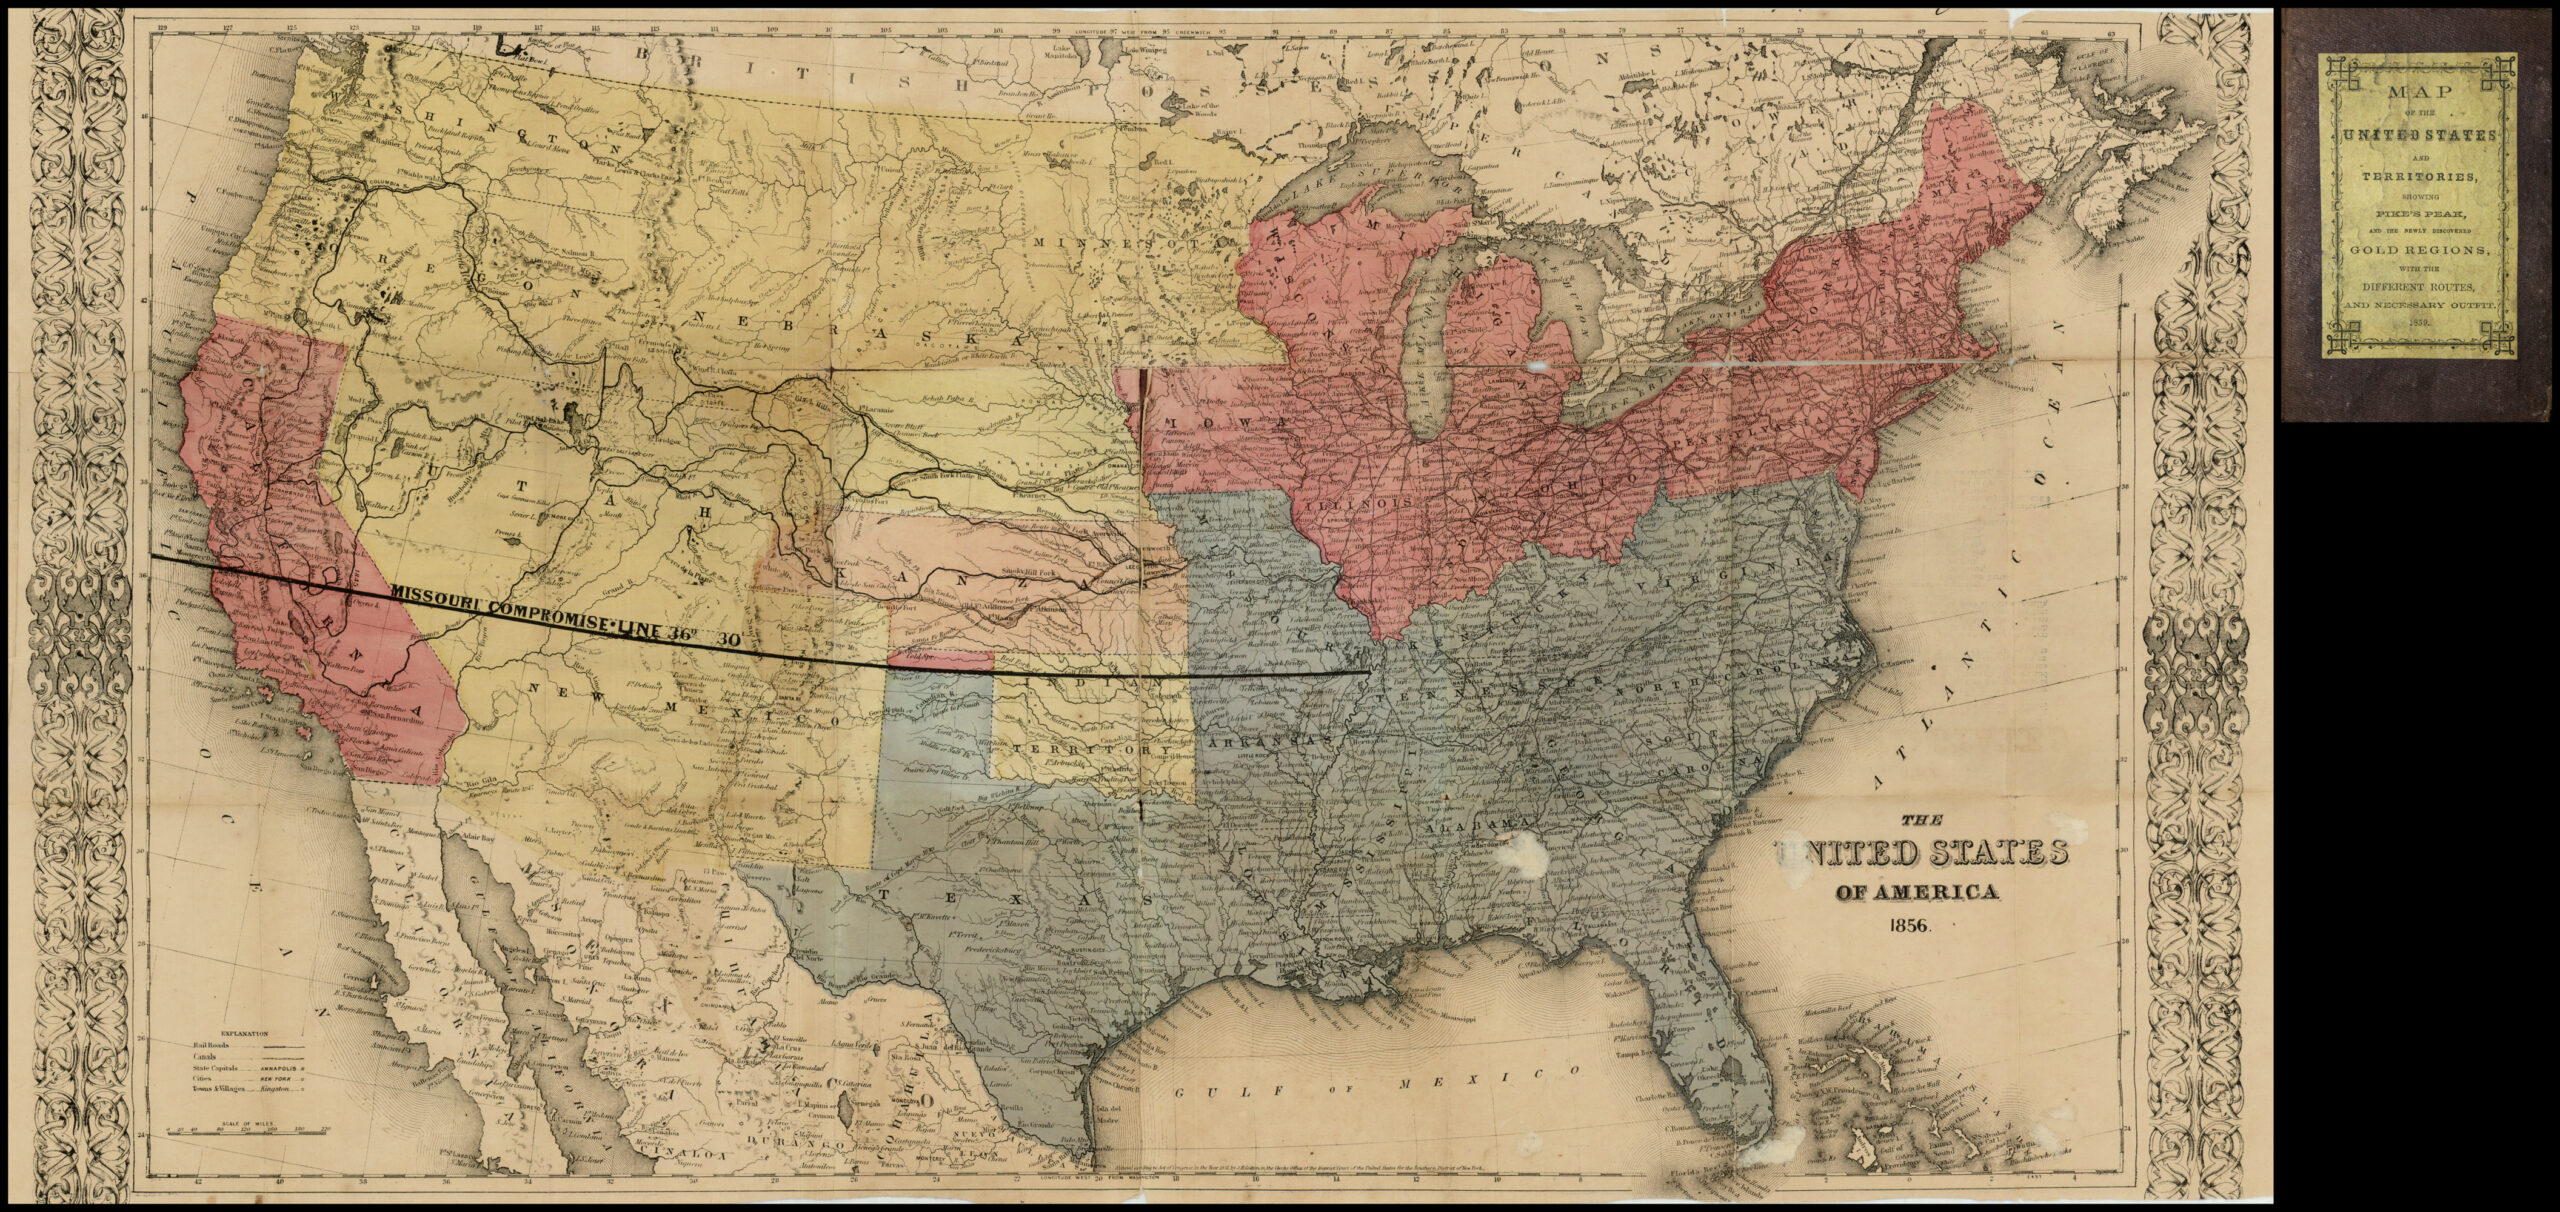 Map Of The United States And Territories Showing Pike s Peak And The 